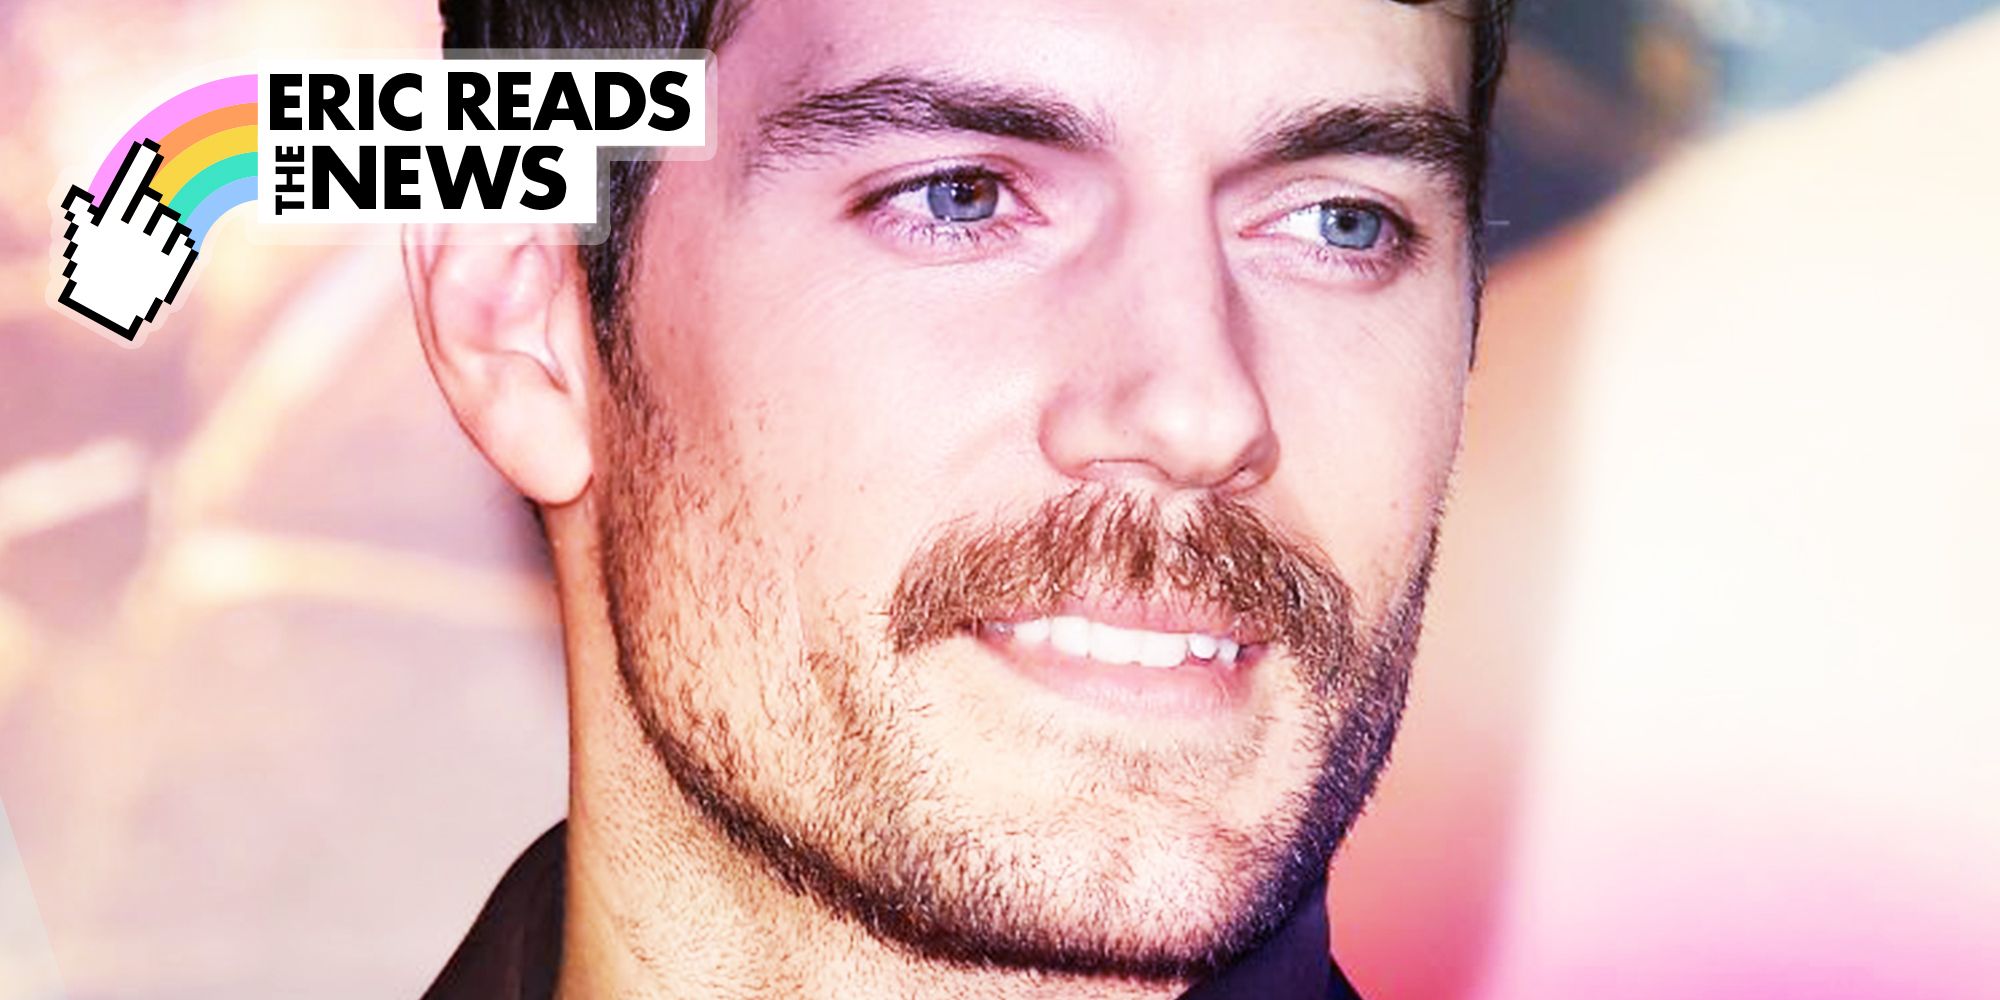 How To Get A Mustache Like HENRY CAVILL!